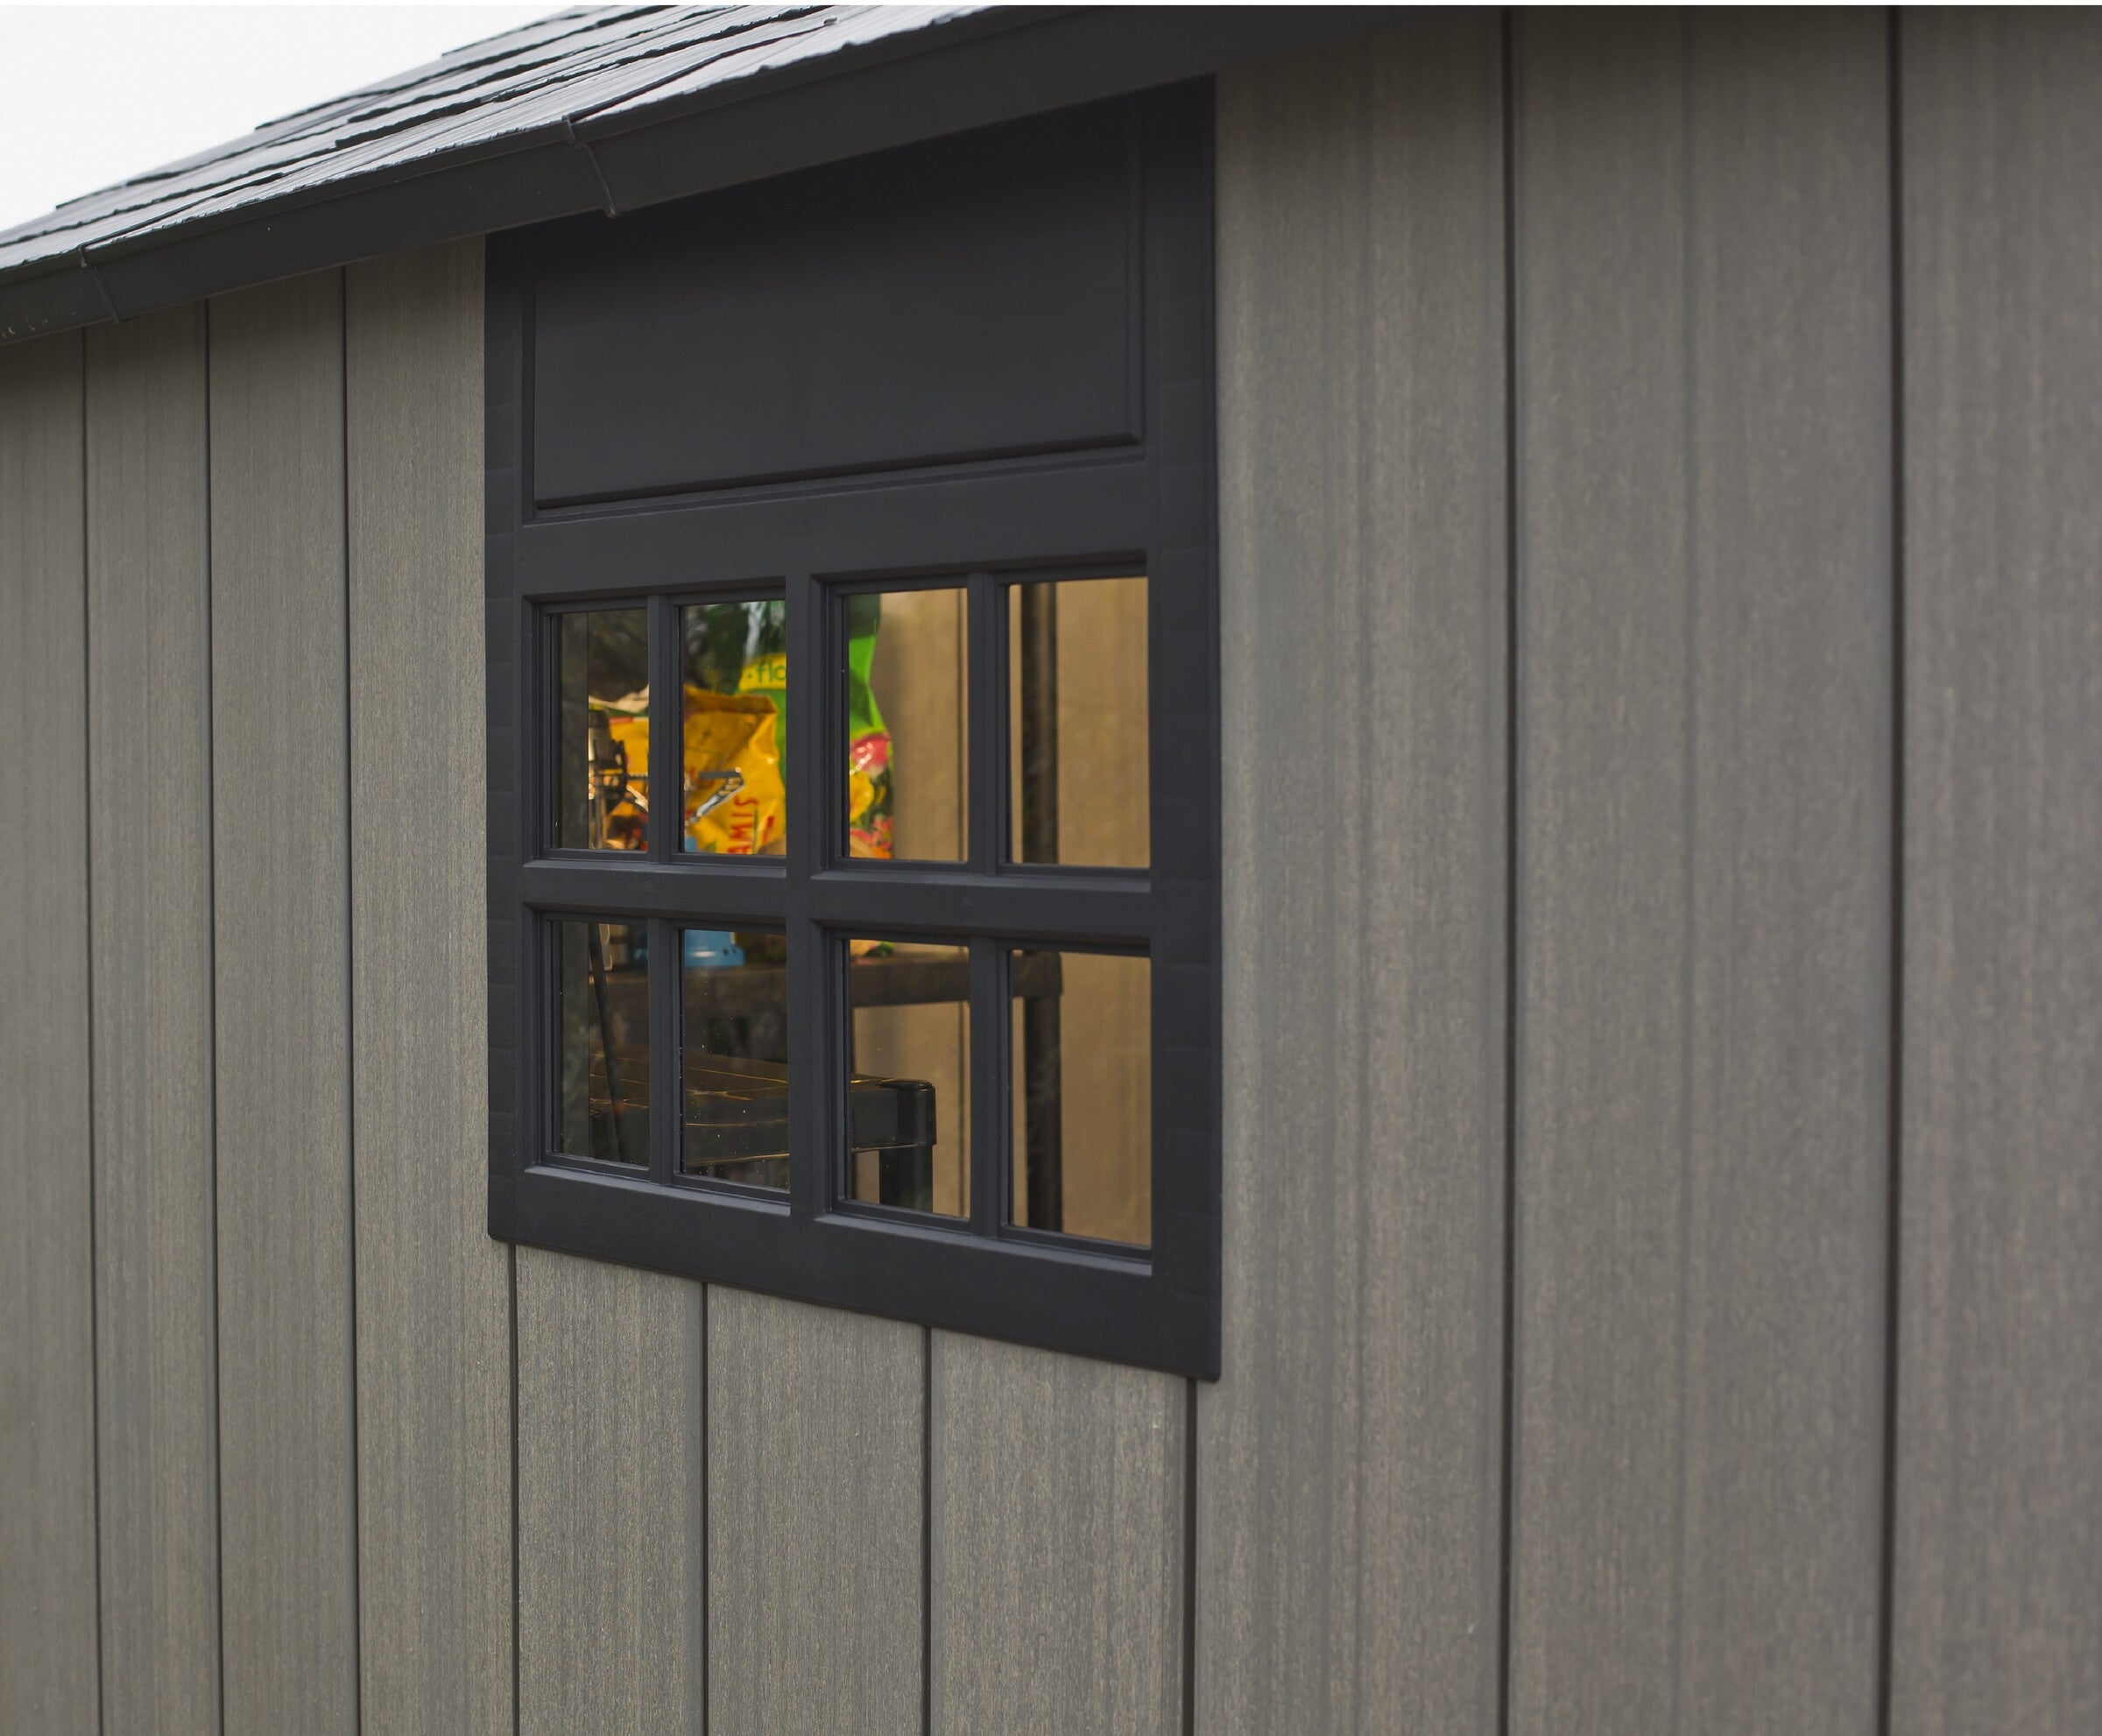 Keter Oakland 7511 Garden Shed with window